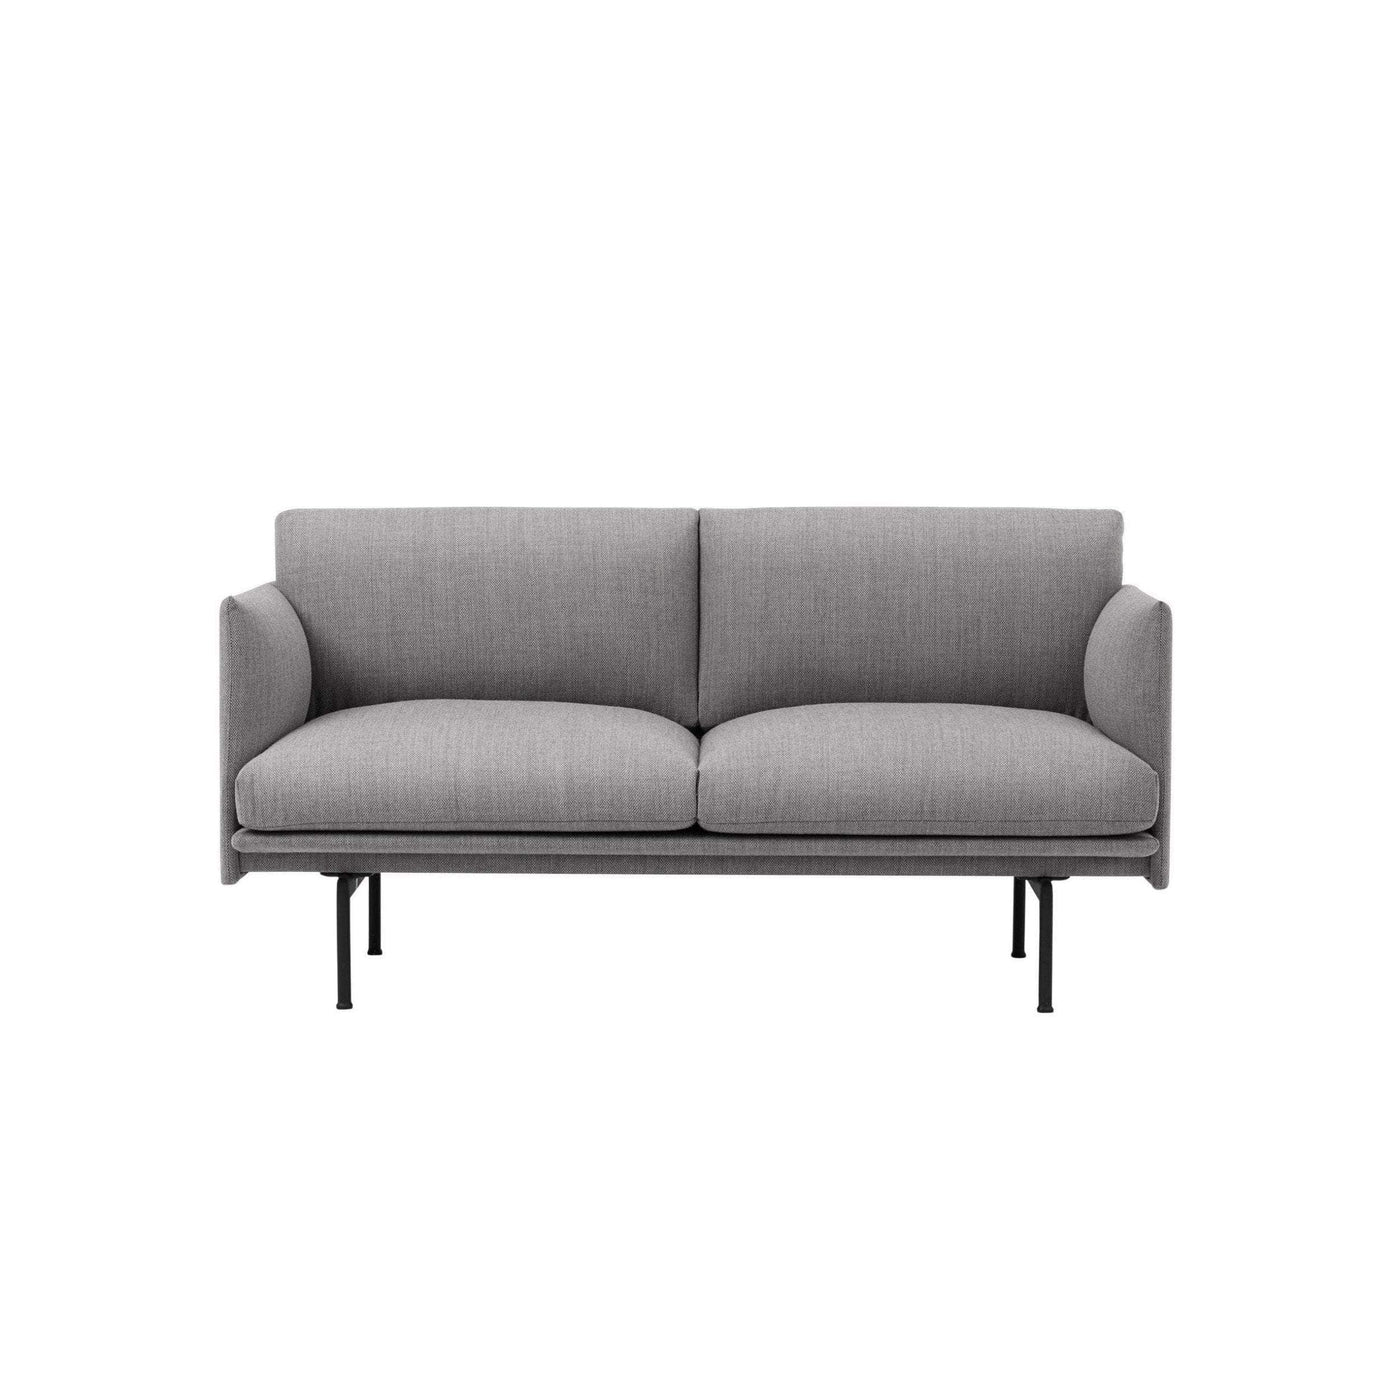 Muuto Outline Sofa Studio in fiord 151 grey fabric and black legs. Made to order from someday designs.  #colour_fiord-151